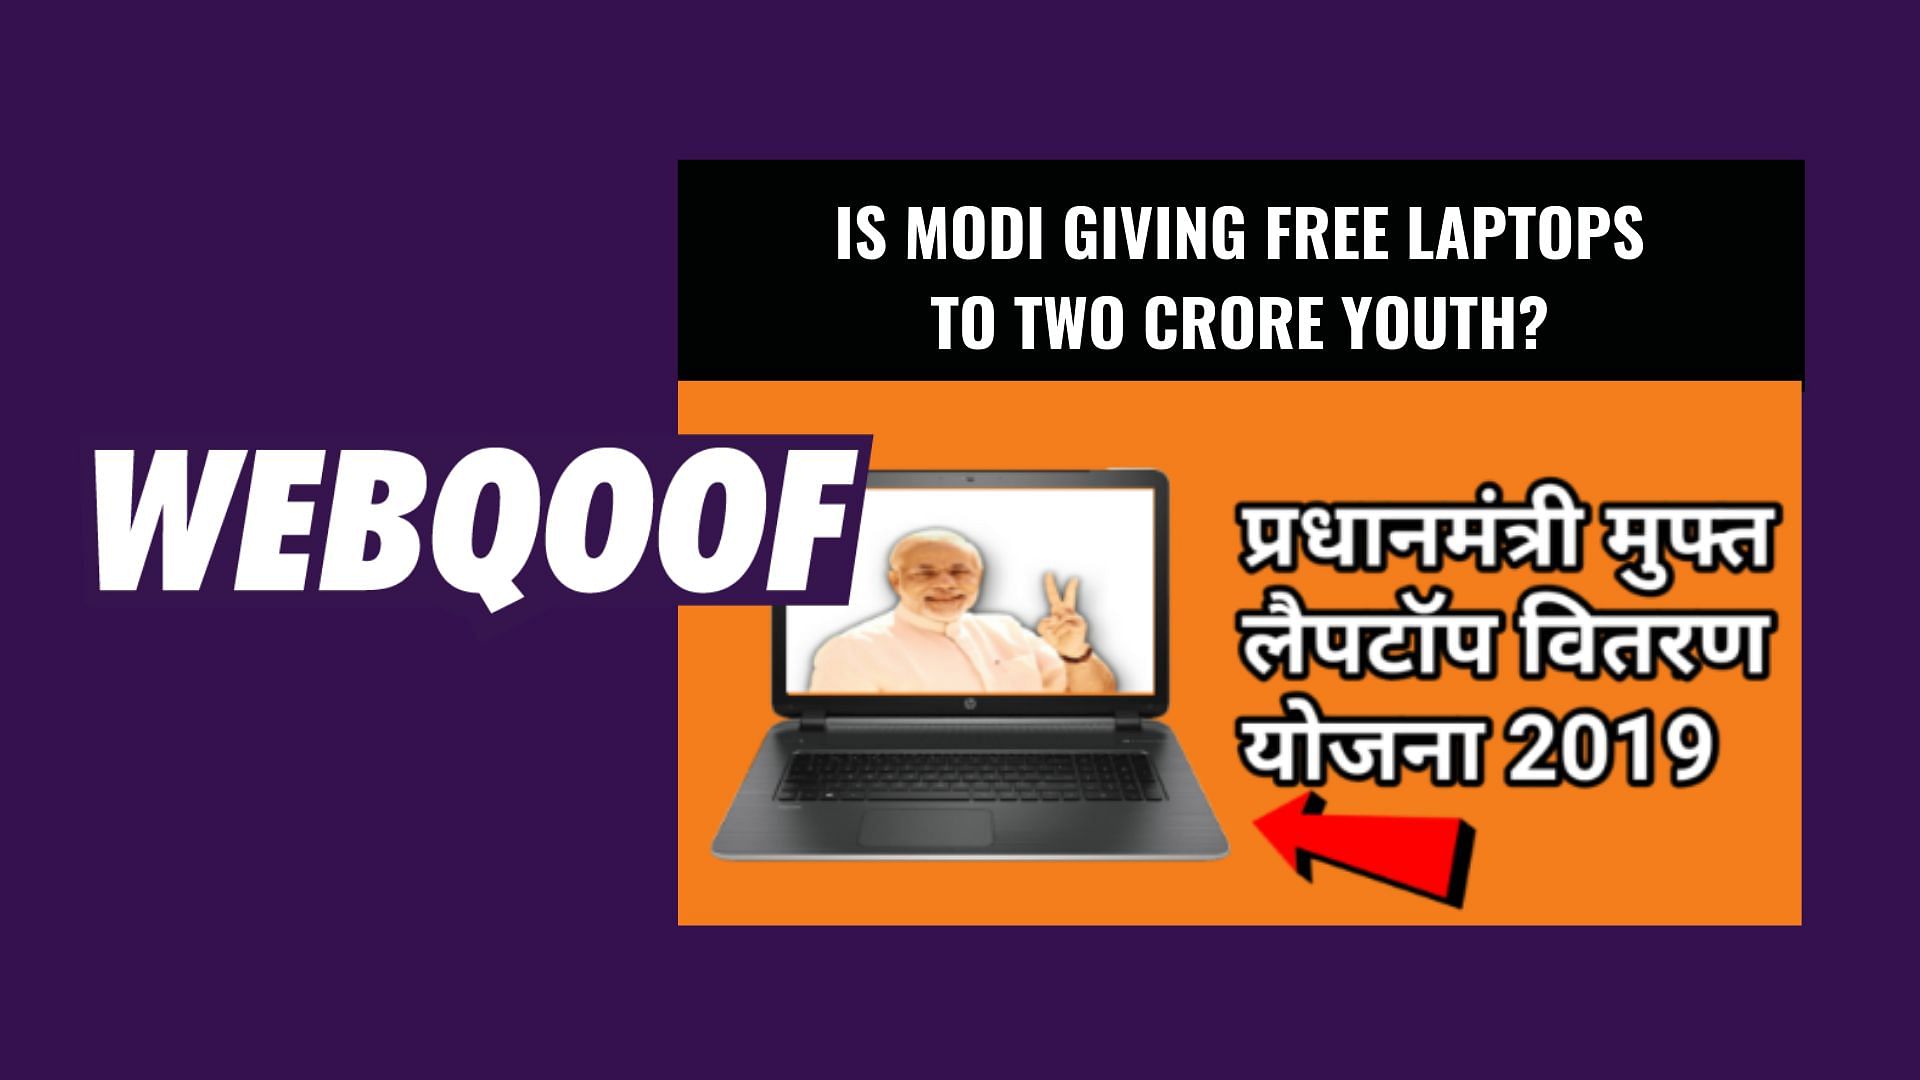 A viral message falsely claimed that PM Narendra Modi announced free laptops to two crore people.